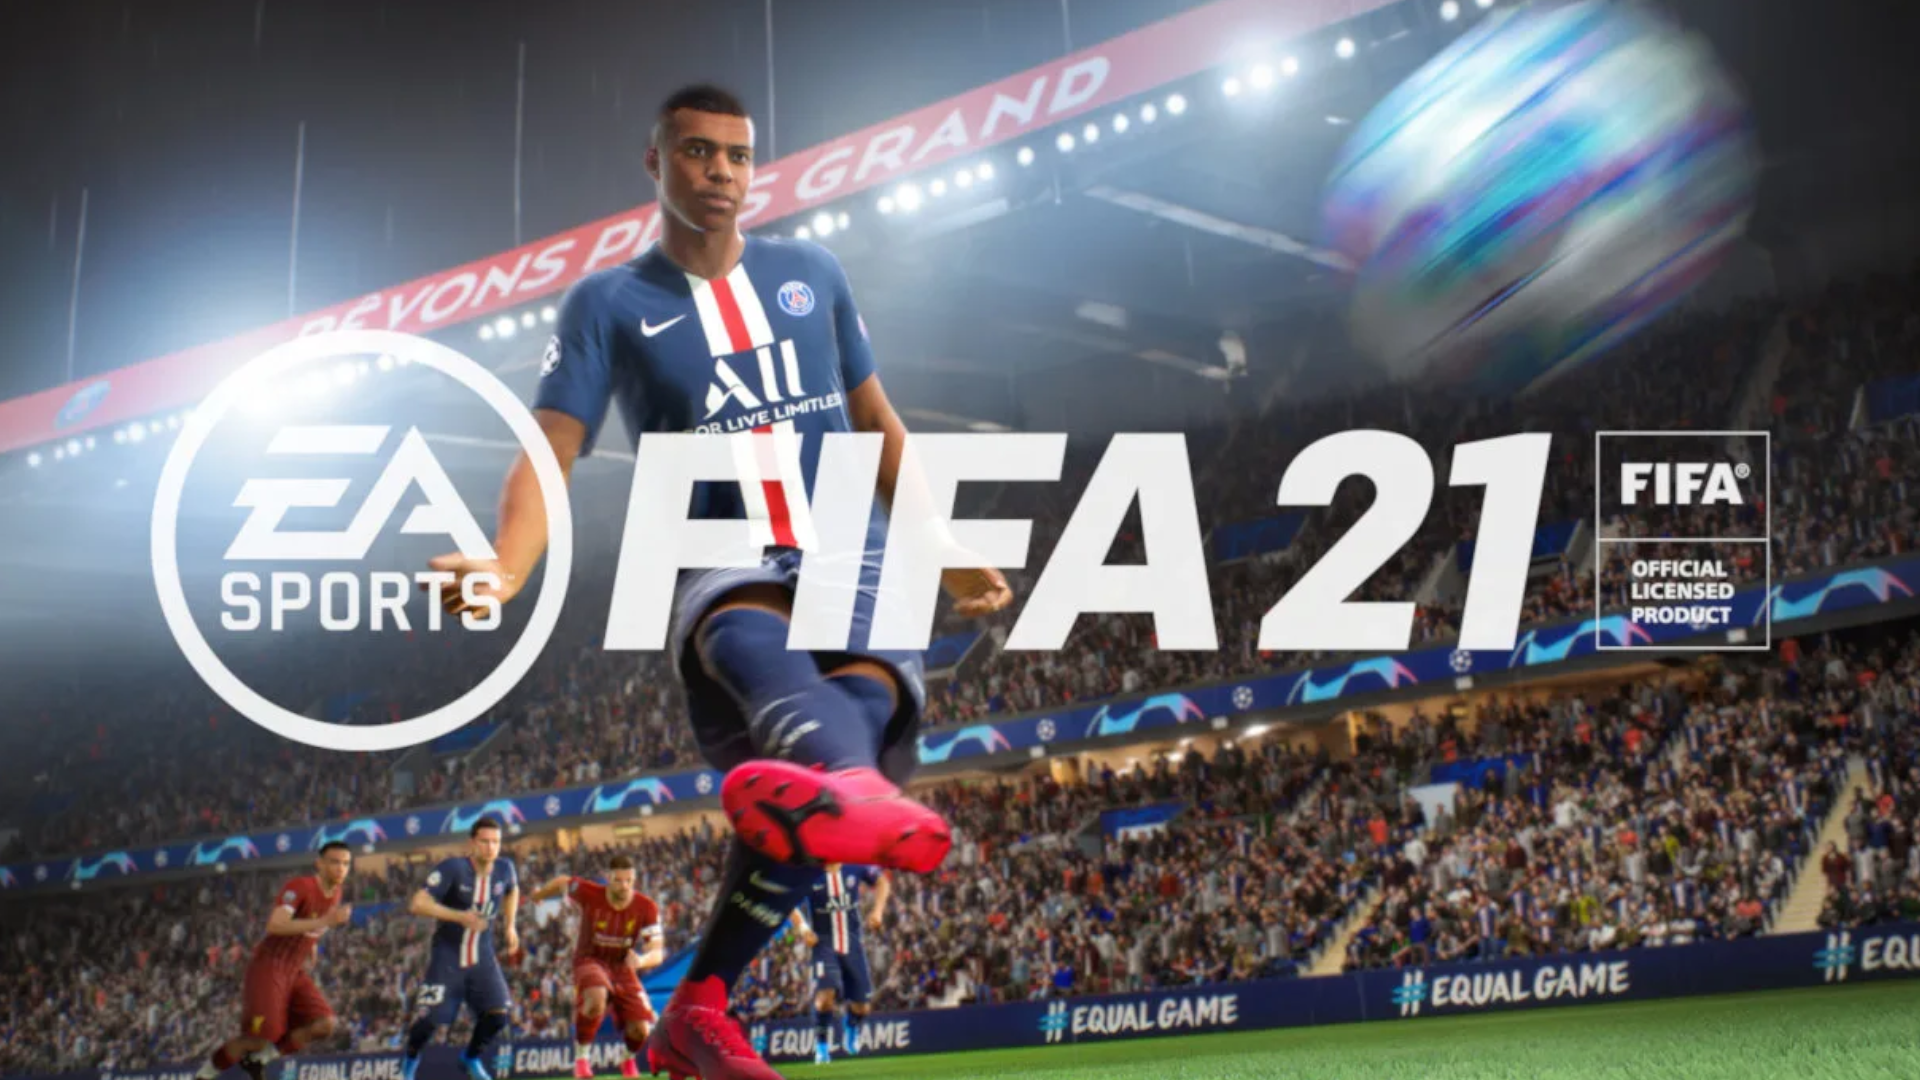 FIFA 21 Gameplay Leaked Let's talk about video games